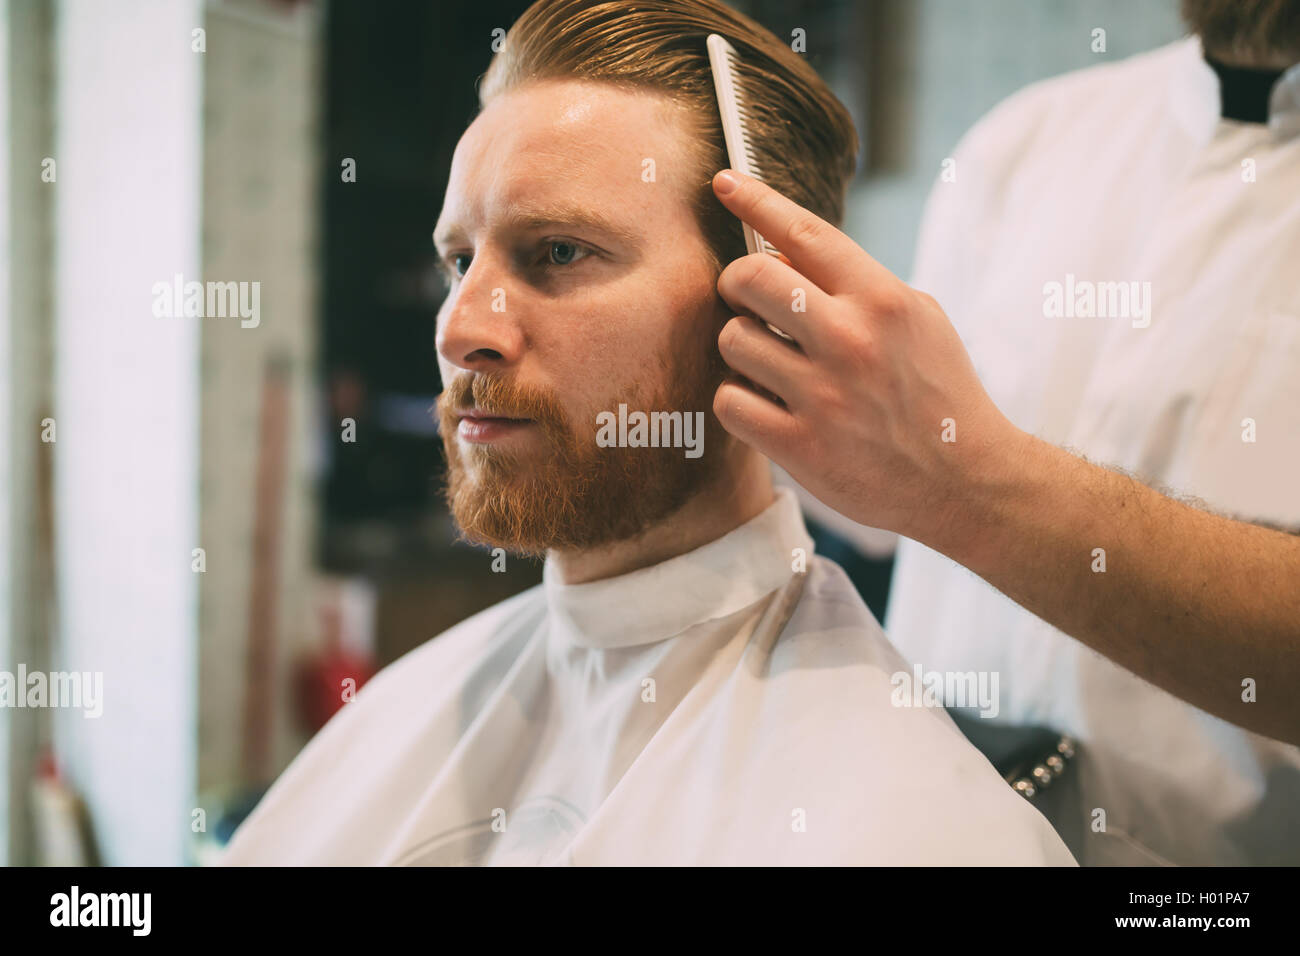 Combing of hair and styling in barber shop Stock Photo